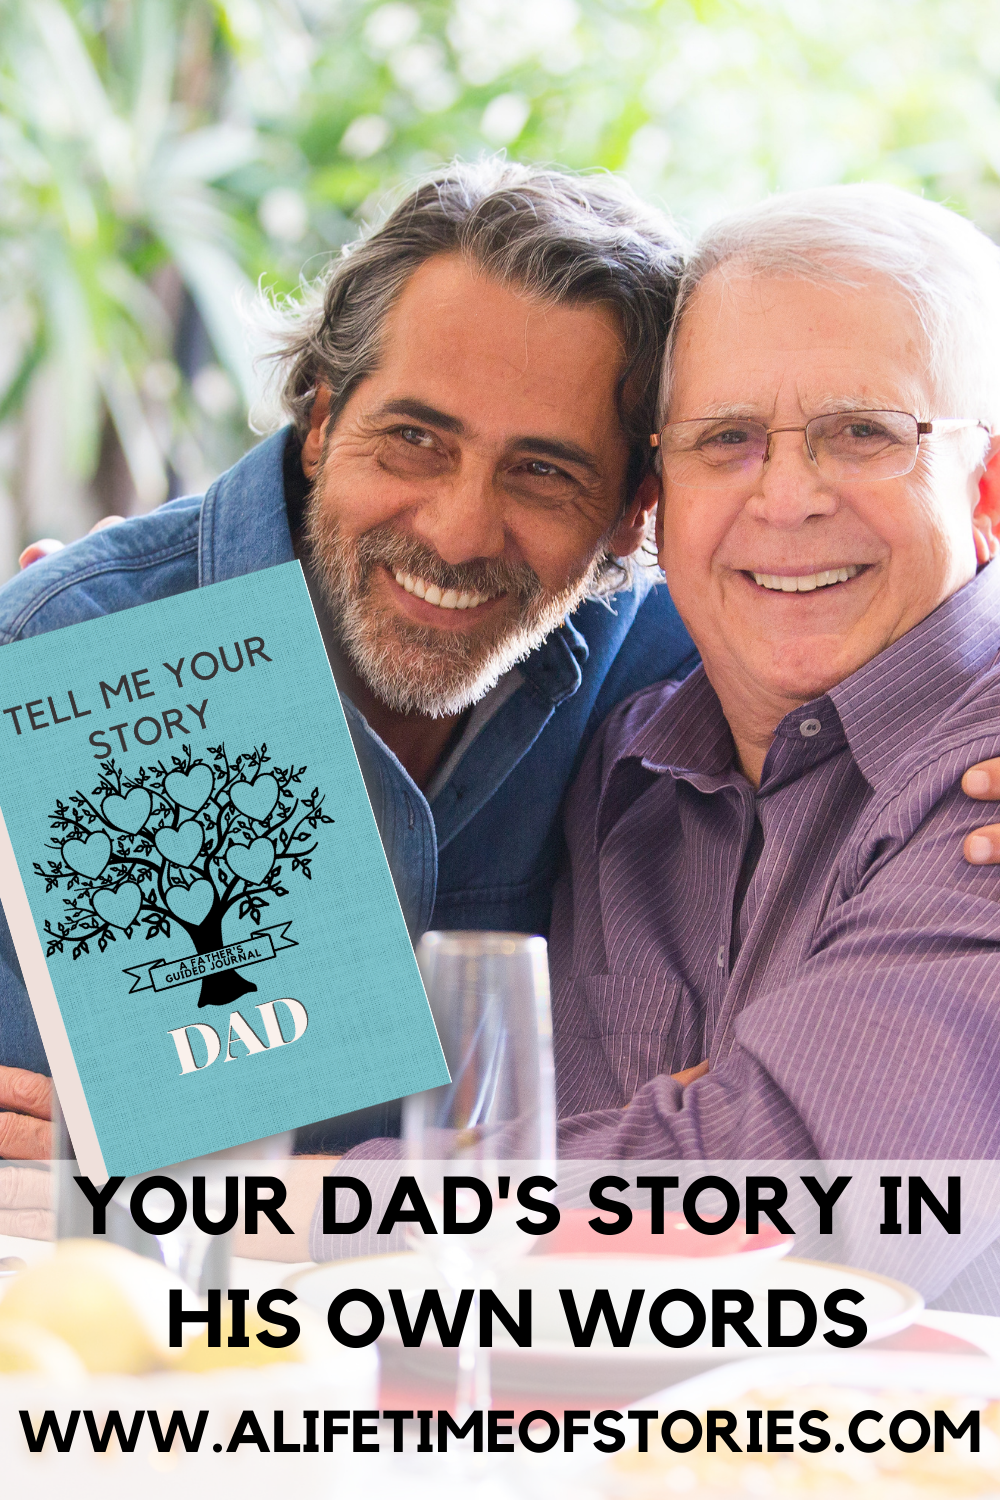 Your Dad's story in his own words text on background with grown up son and dad